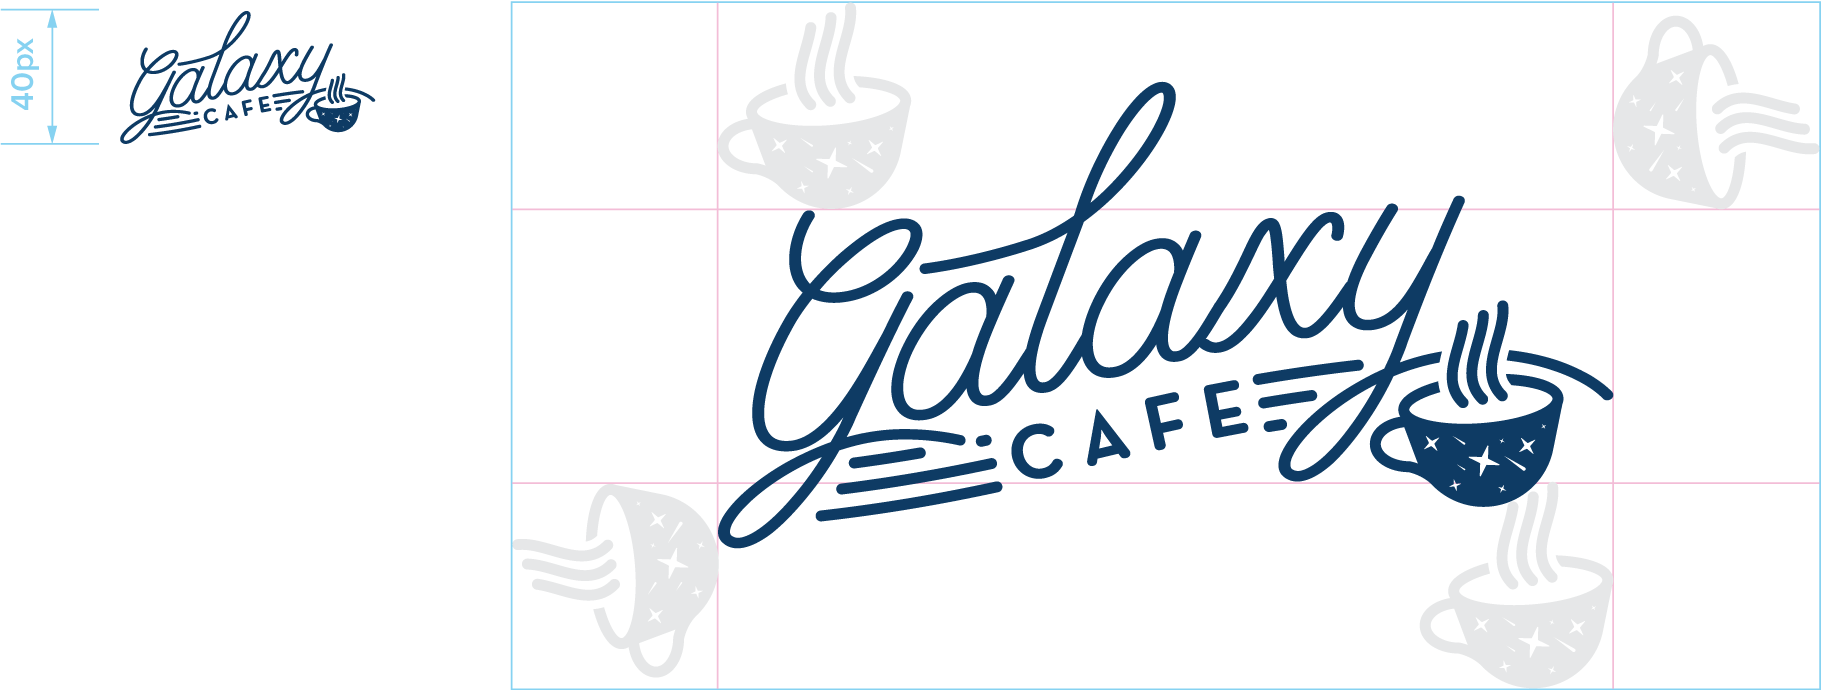 Galaxy Cafe Logo Clear space guidance